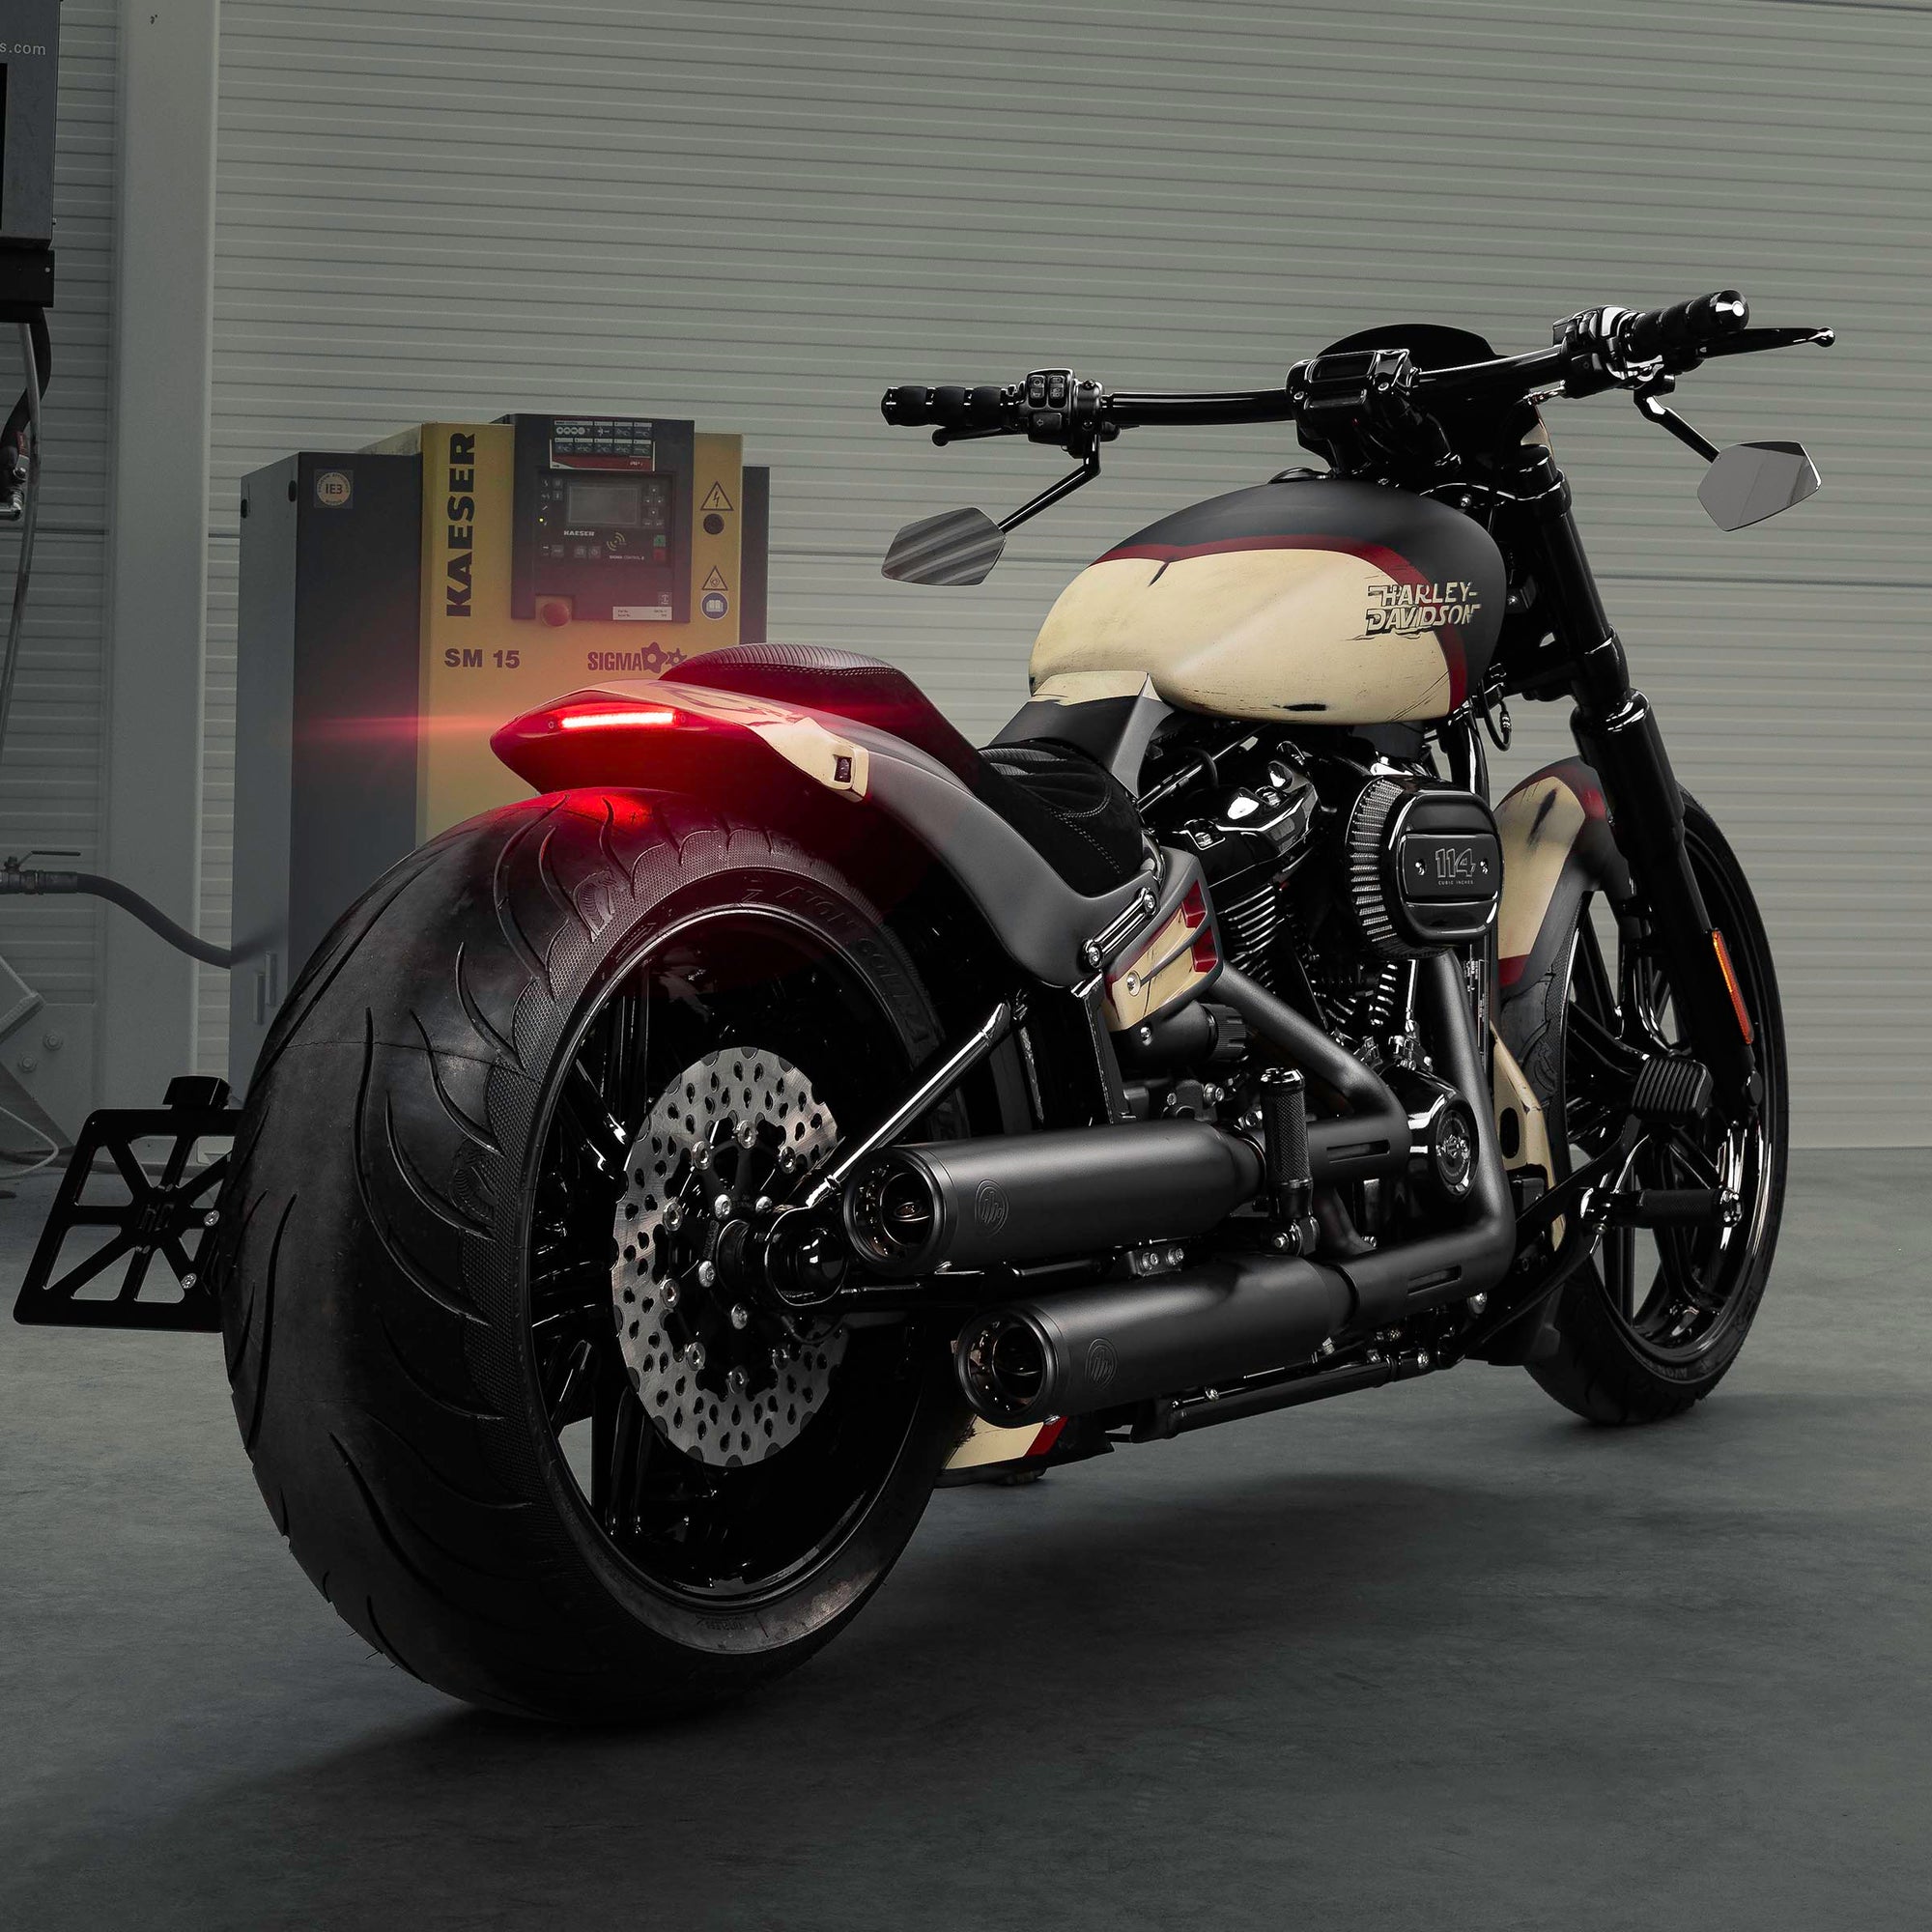 Modified Harley Davidson Breakout motorcycle with Killer Custom parts from the rear in a modern bike shop